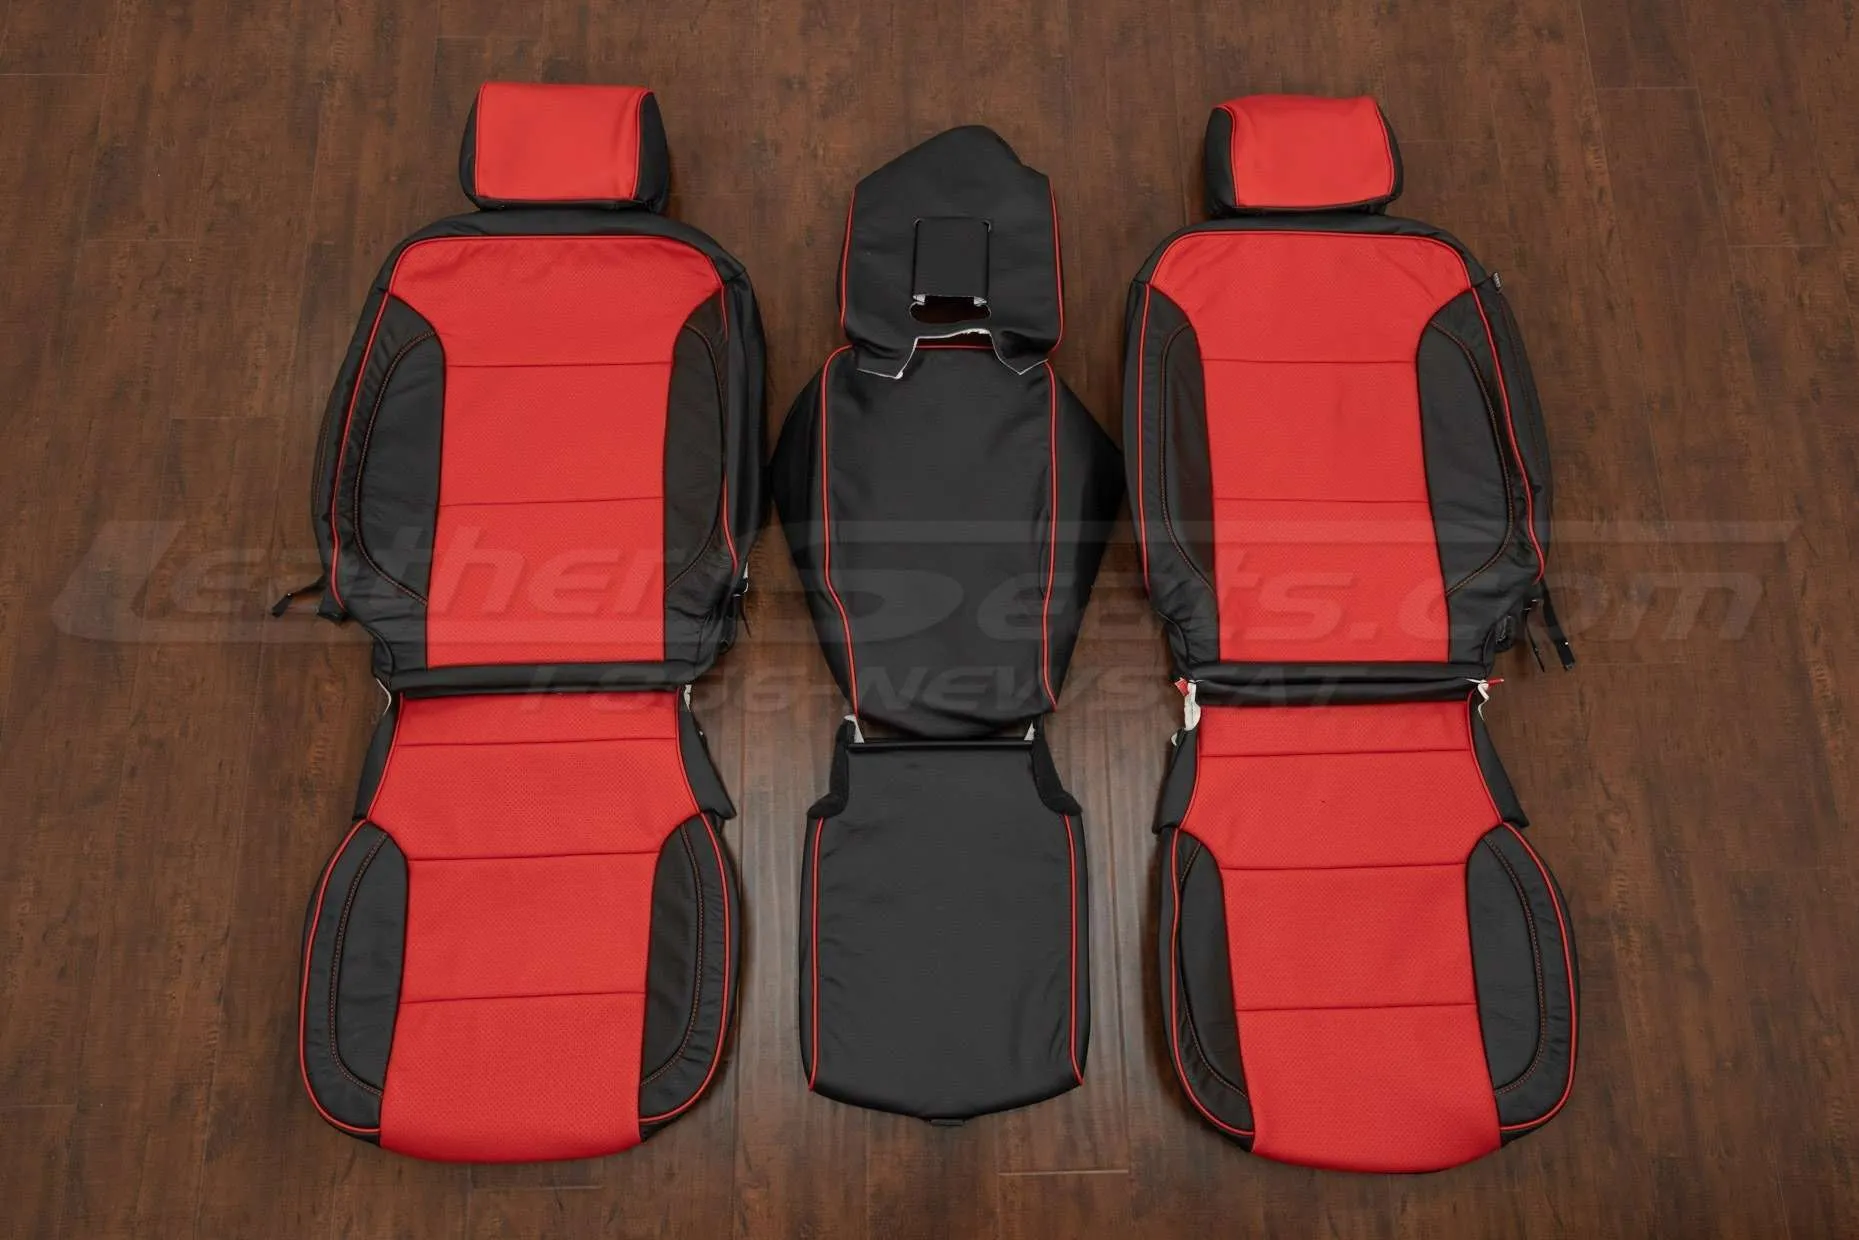 GMC Sierra Leather Seat Kit - Black & Bright Red - Front seat upholstery